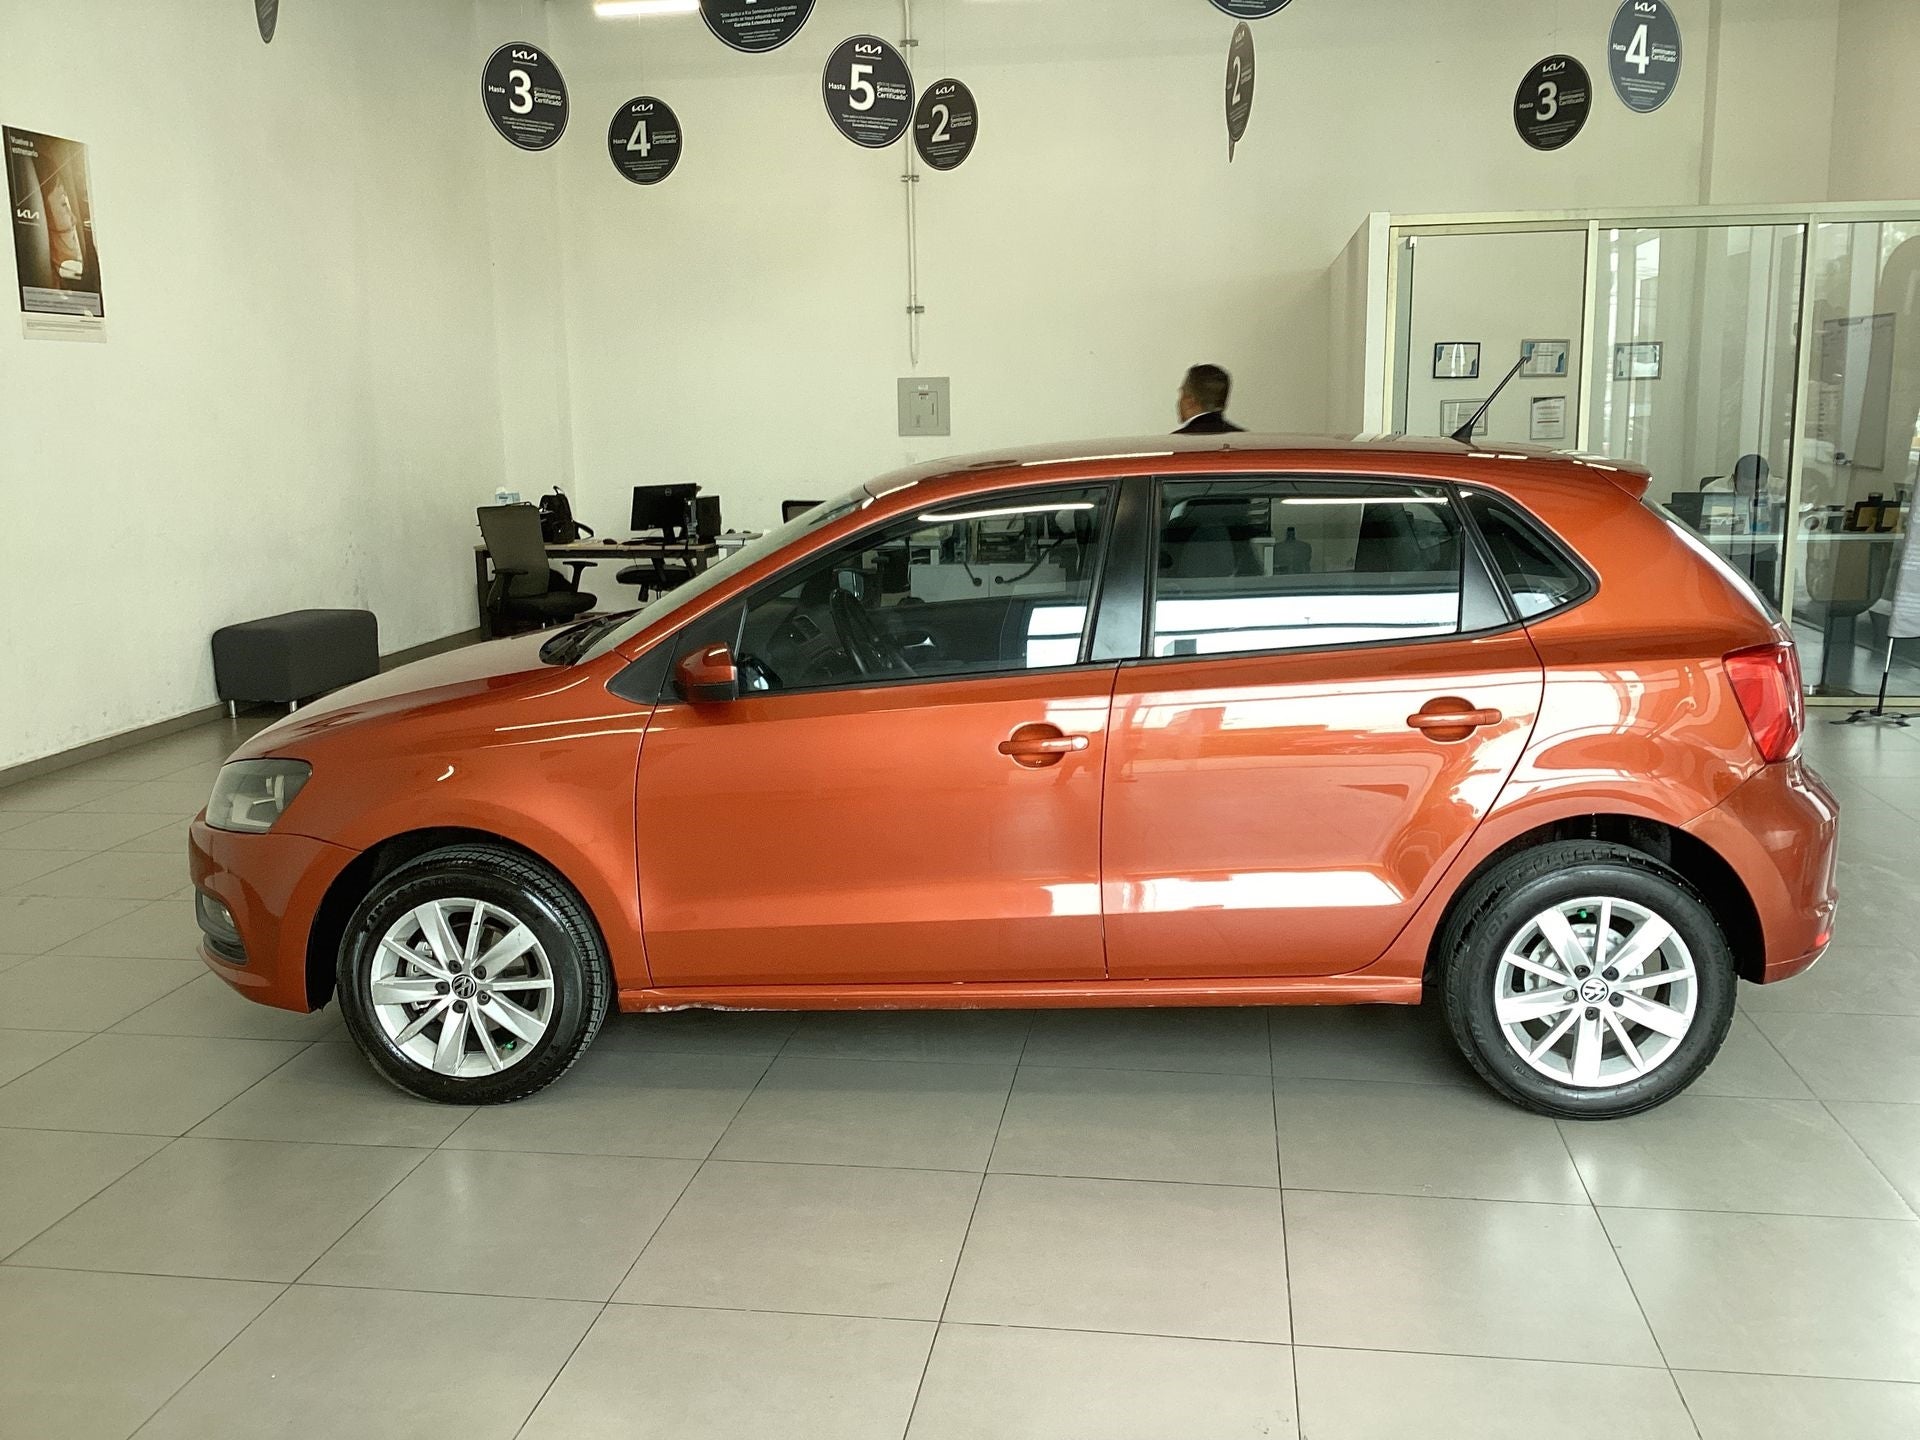 2017 Volkswagen Polo 1.6 L4 Tiptronic At